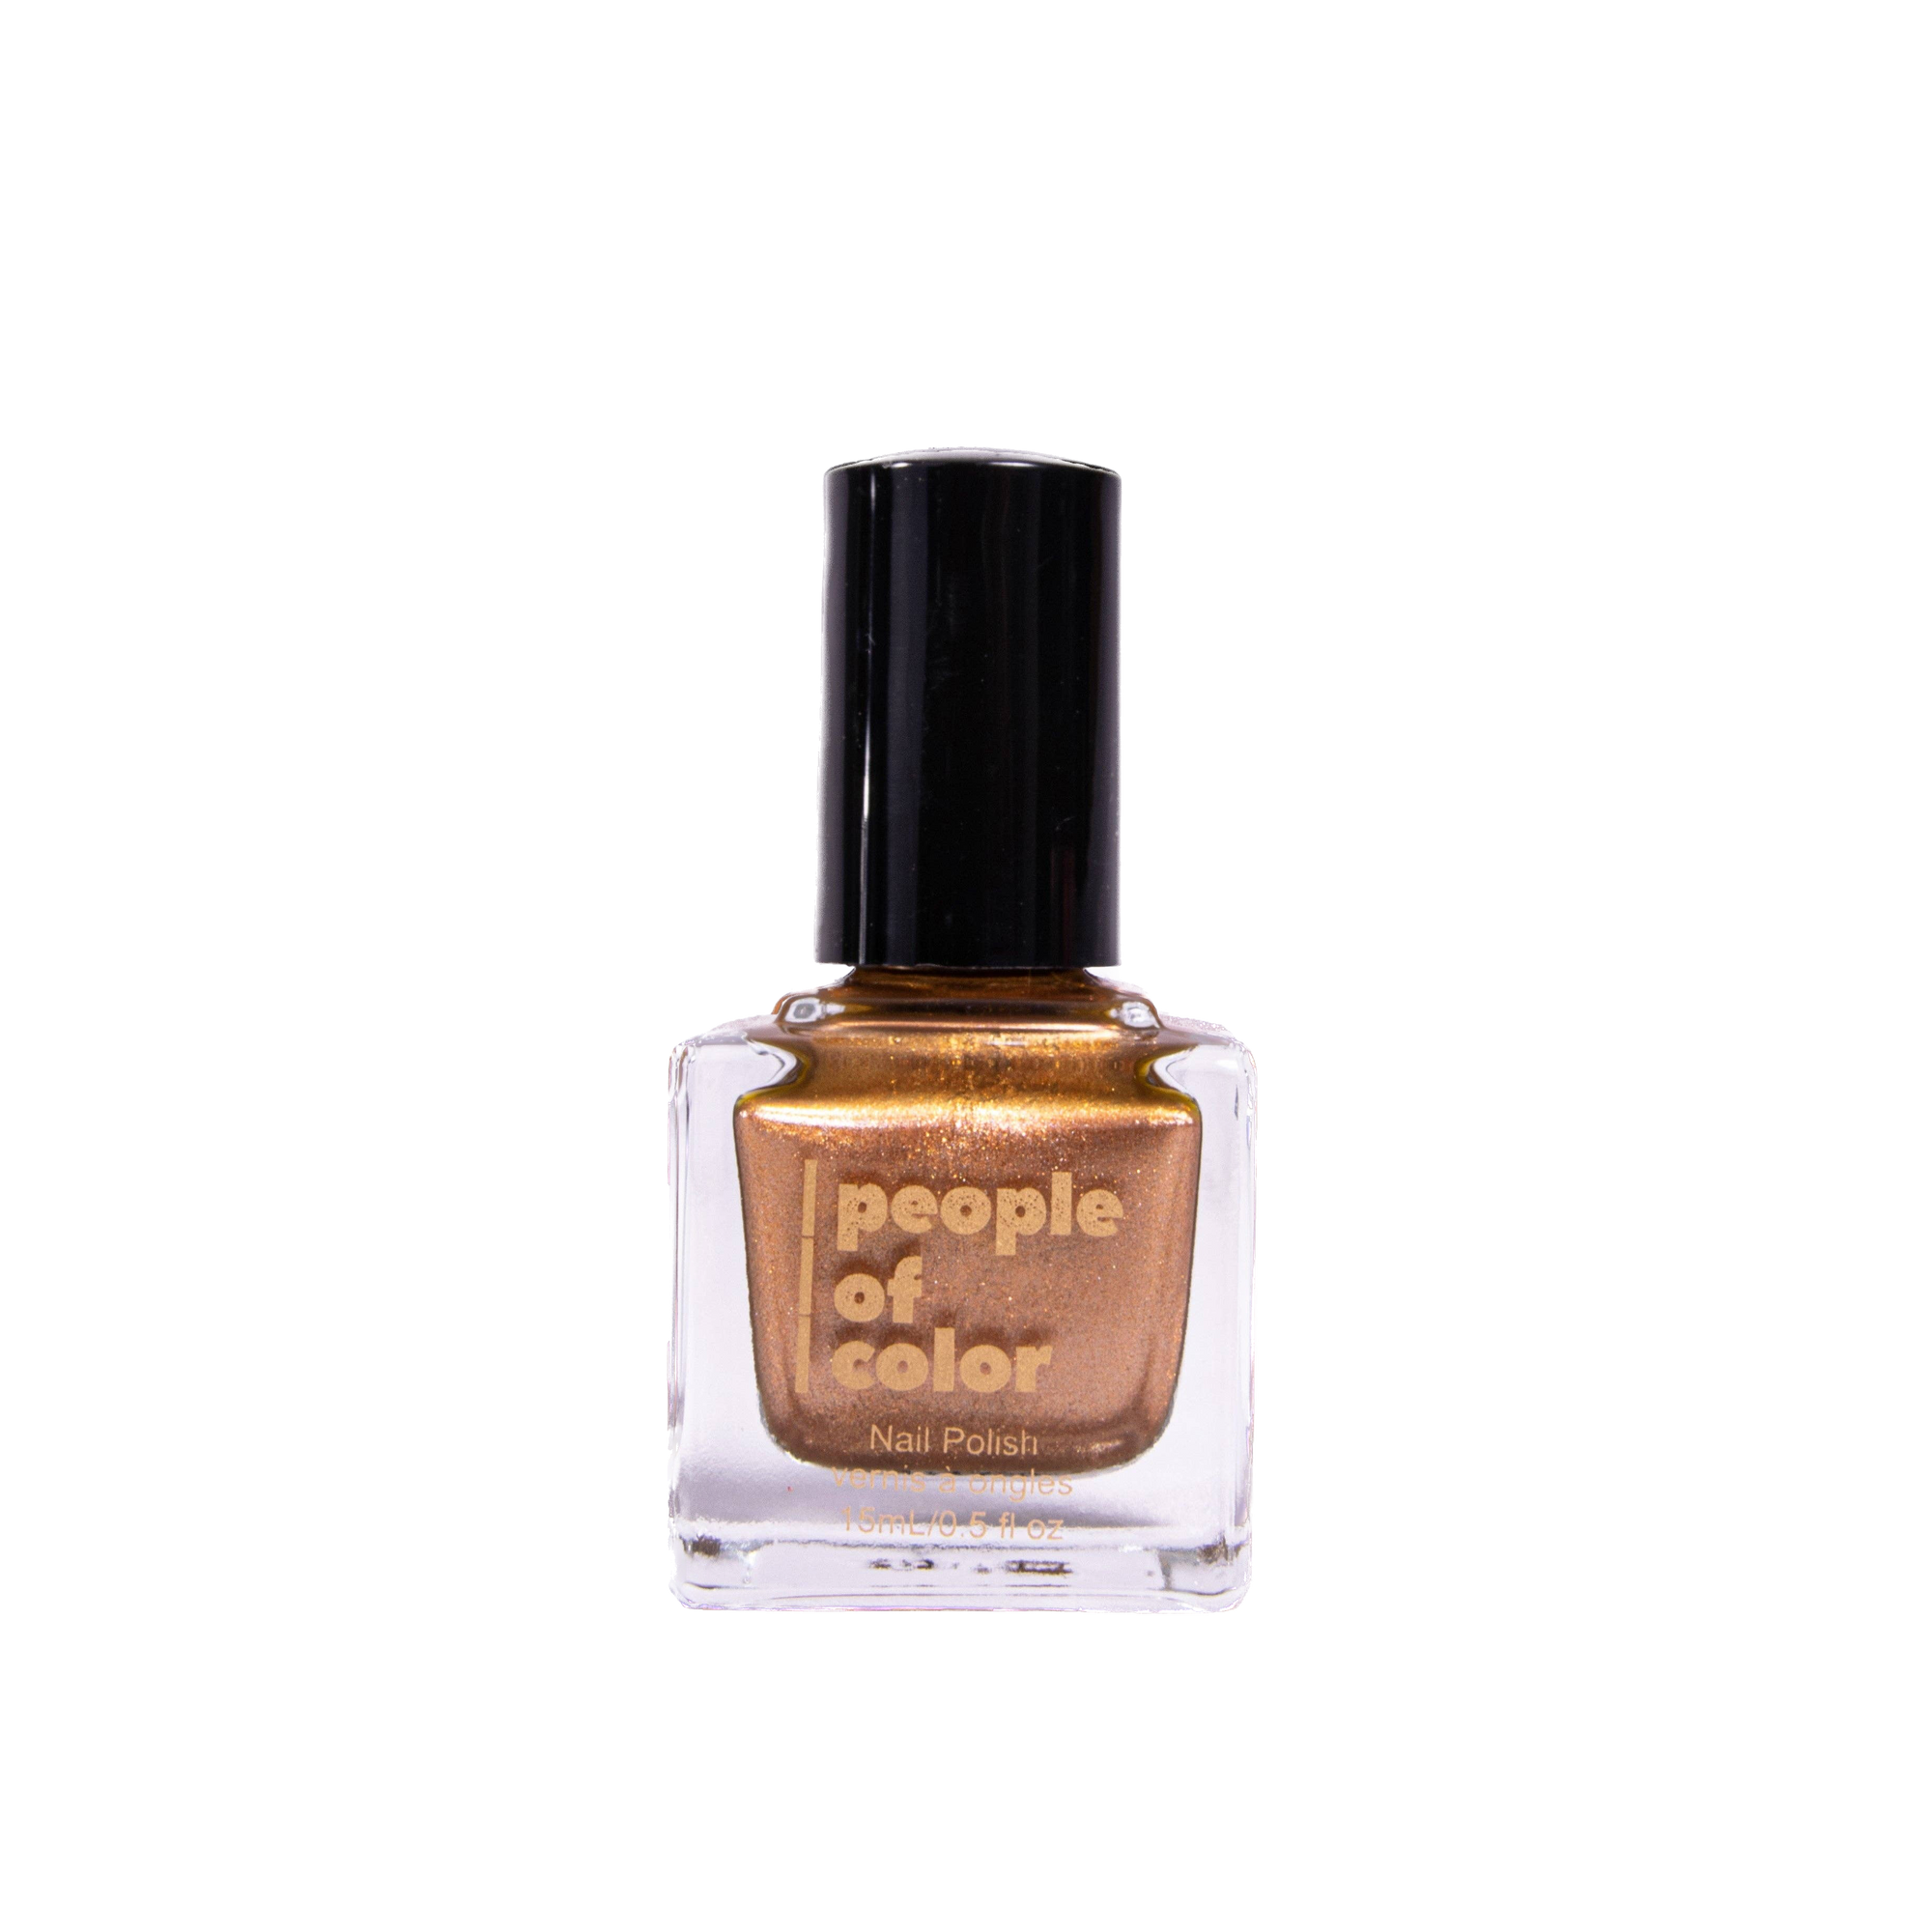 People of Color Vegan Nail Polish Bronzed Beauty color